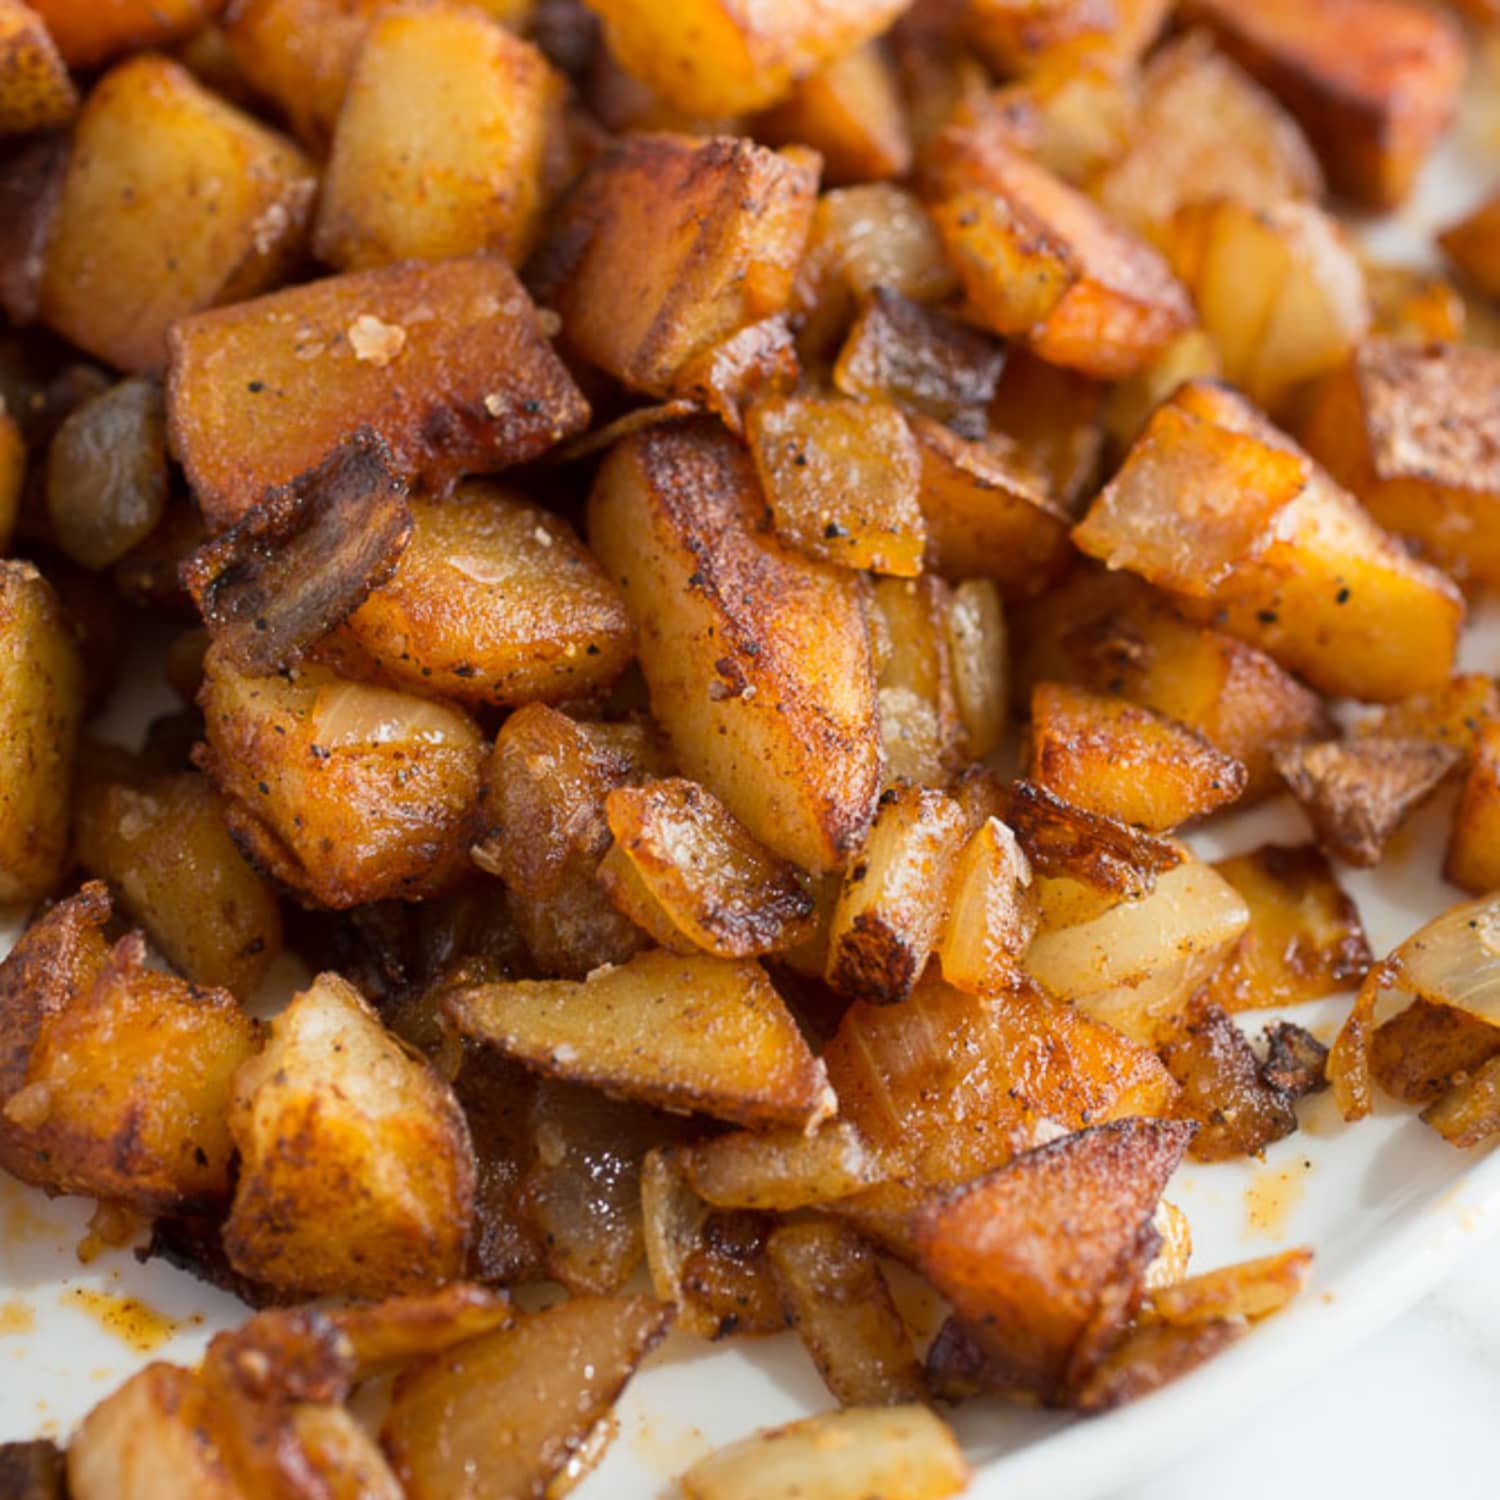 How To Make Home Fries